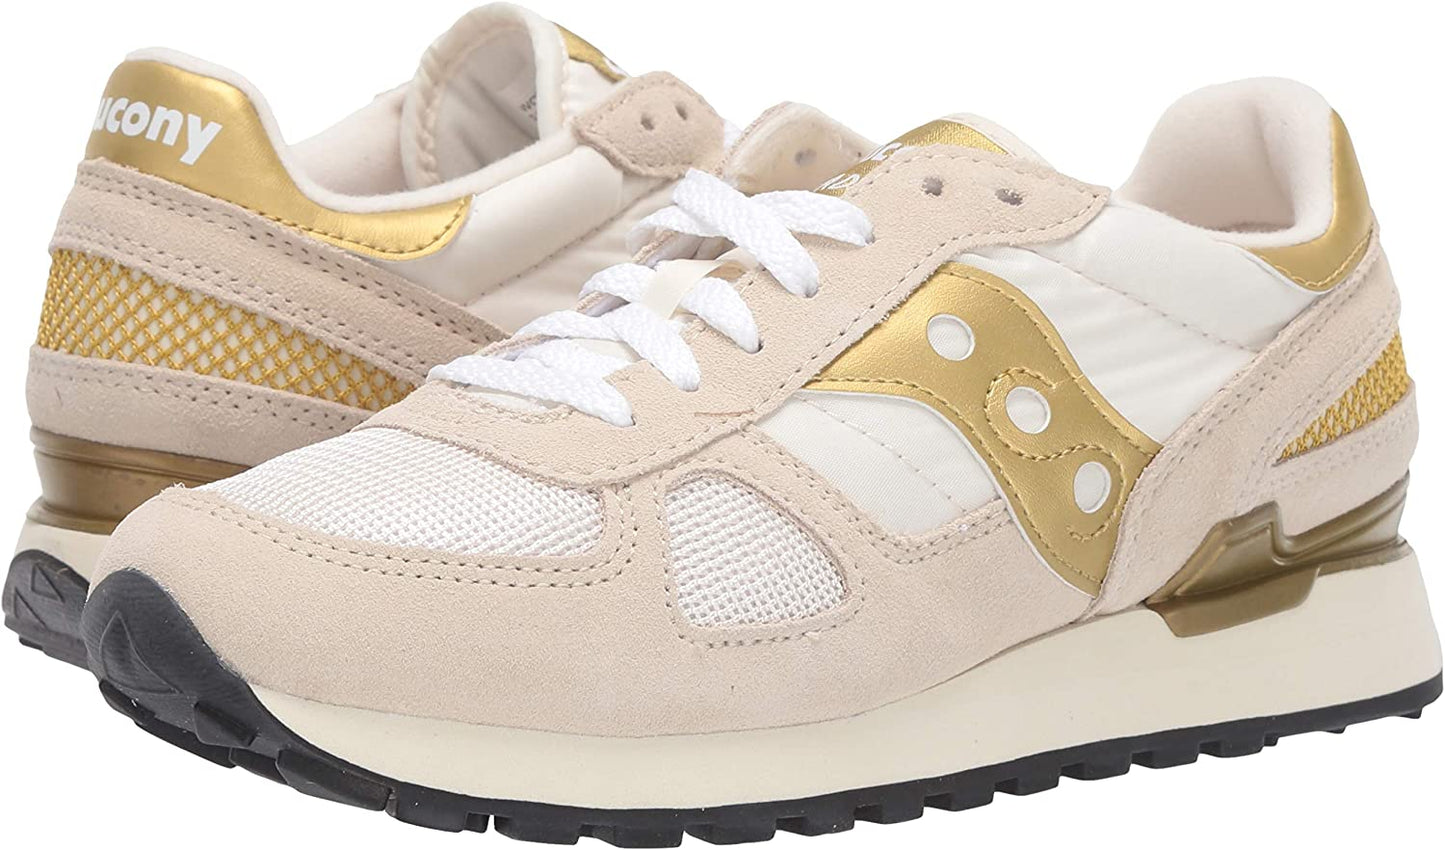 Sneakers Donna SAUCONY-mod. SHADOW S1108-720